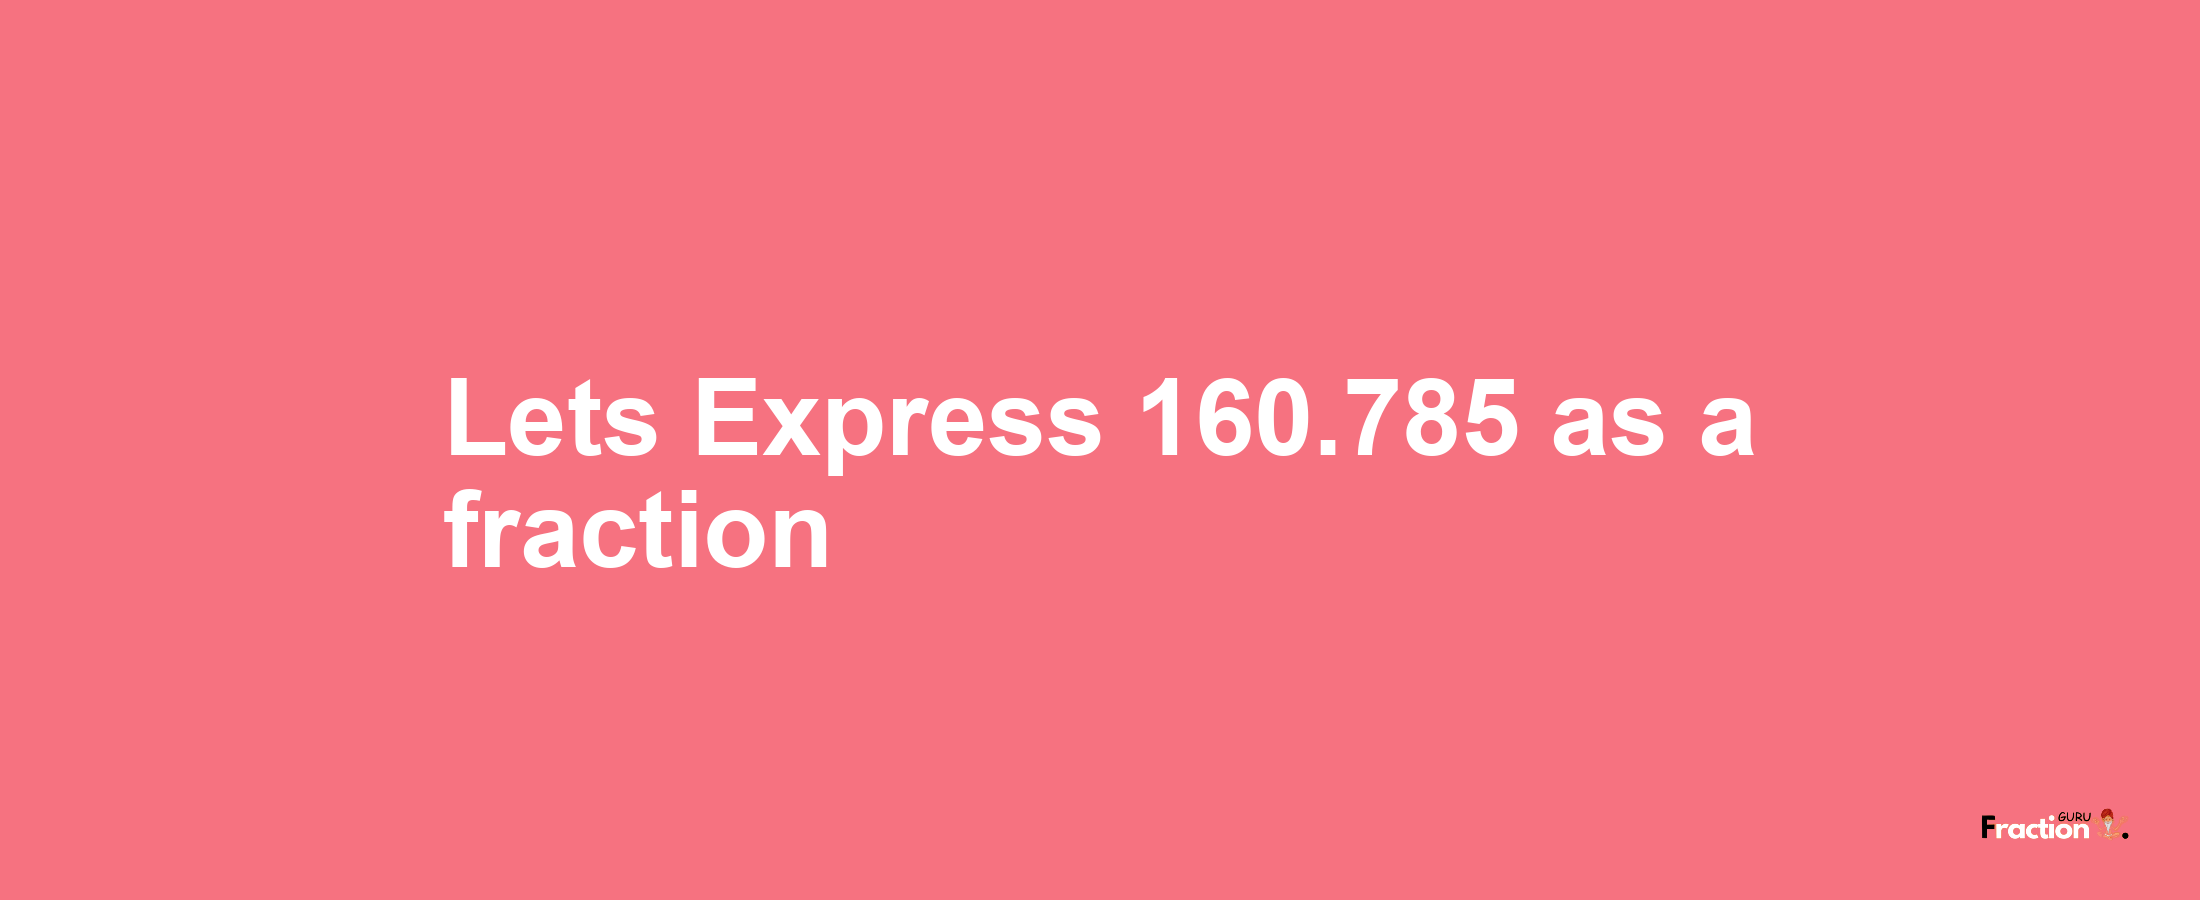 Lets Express 160.785 as afraction